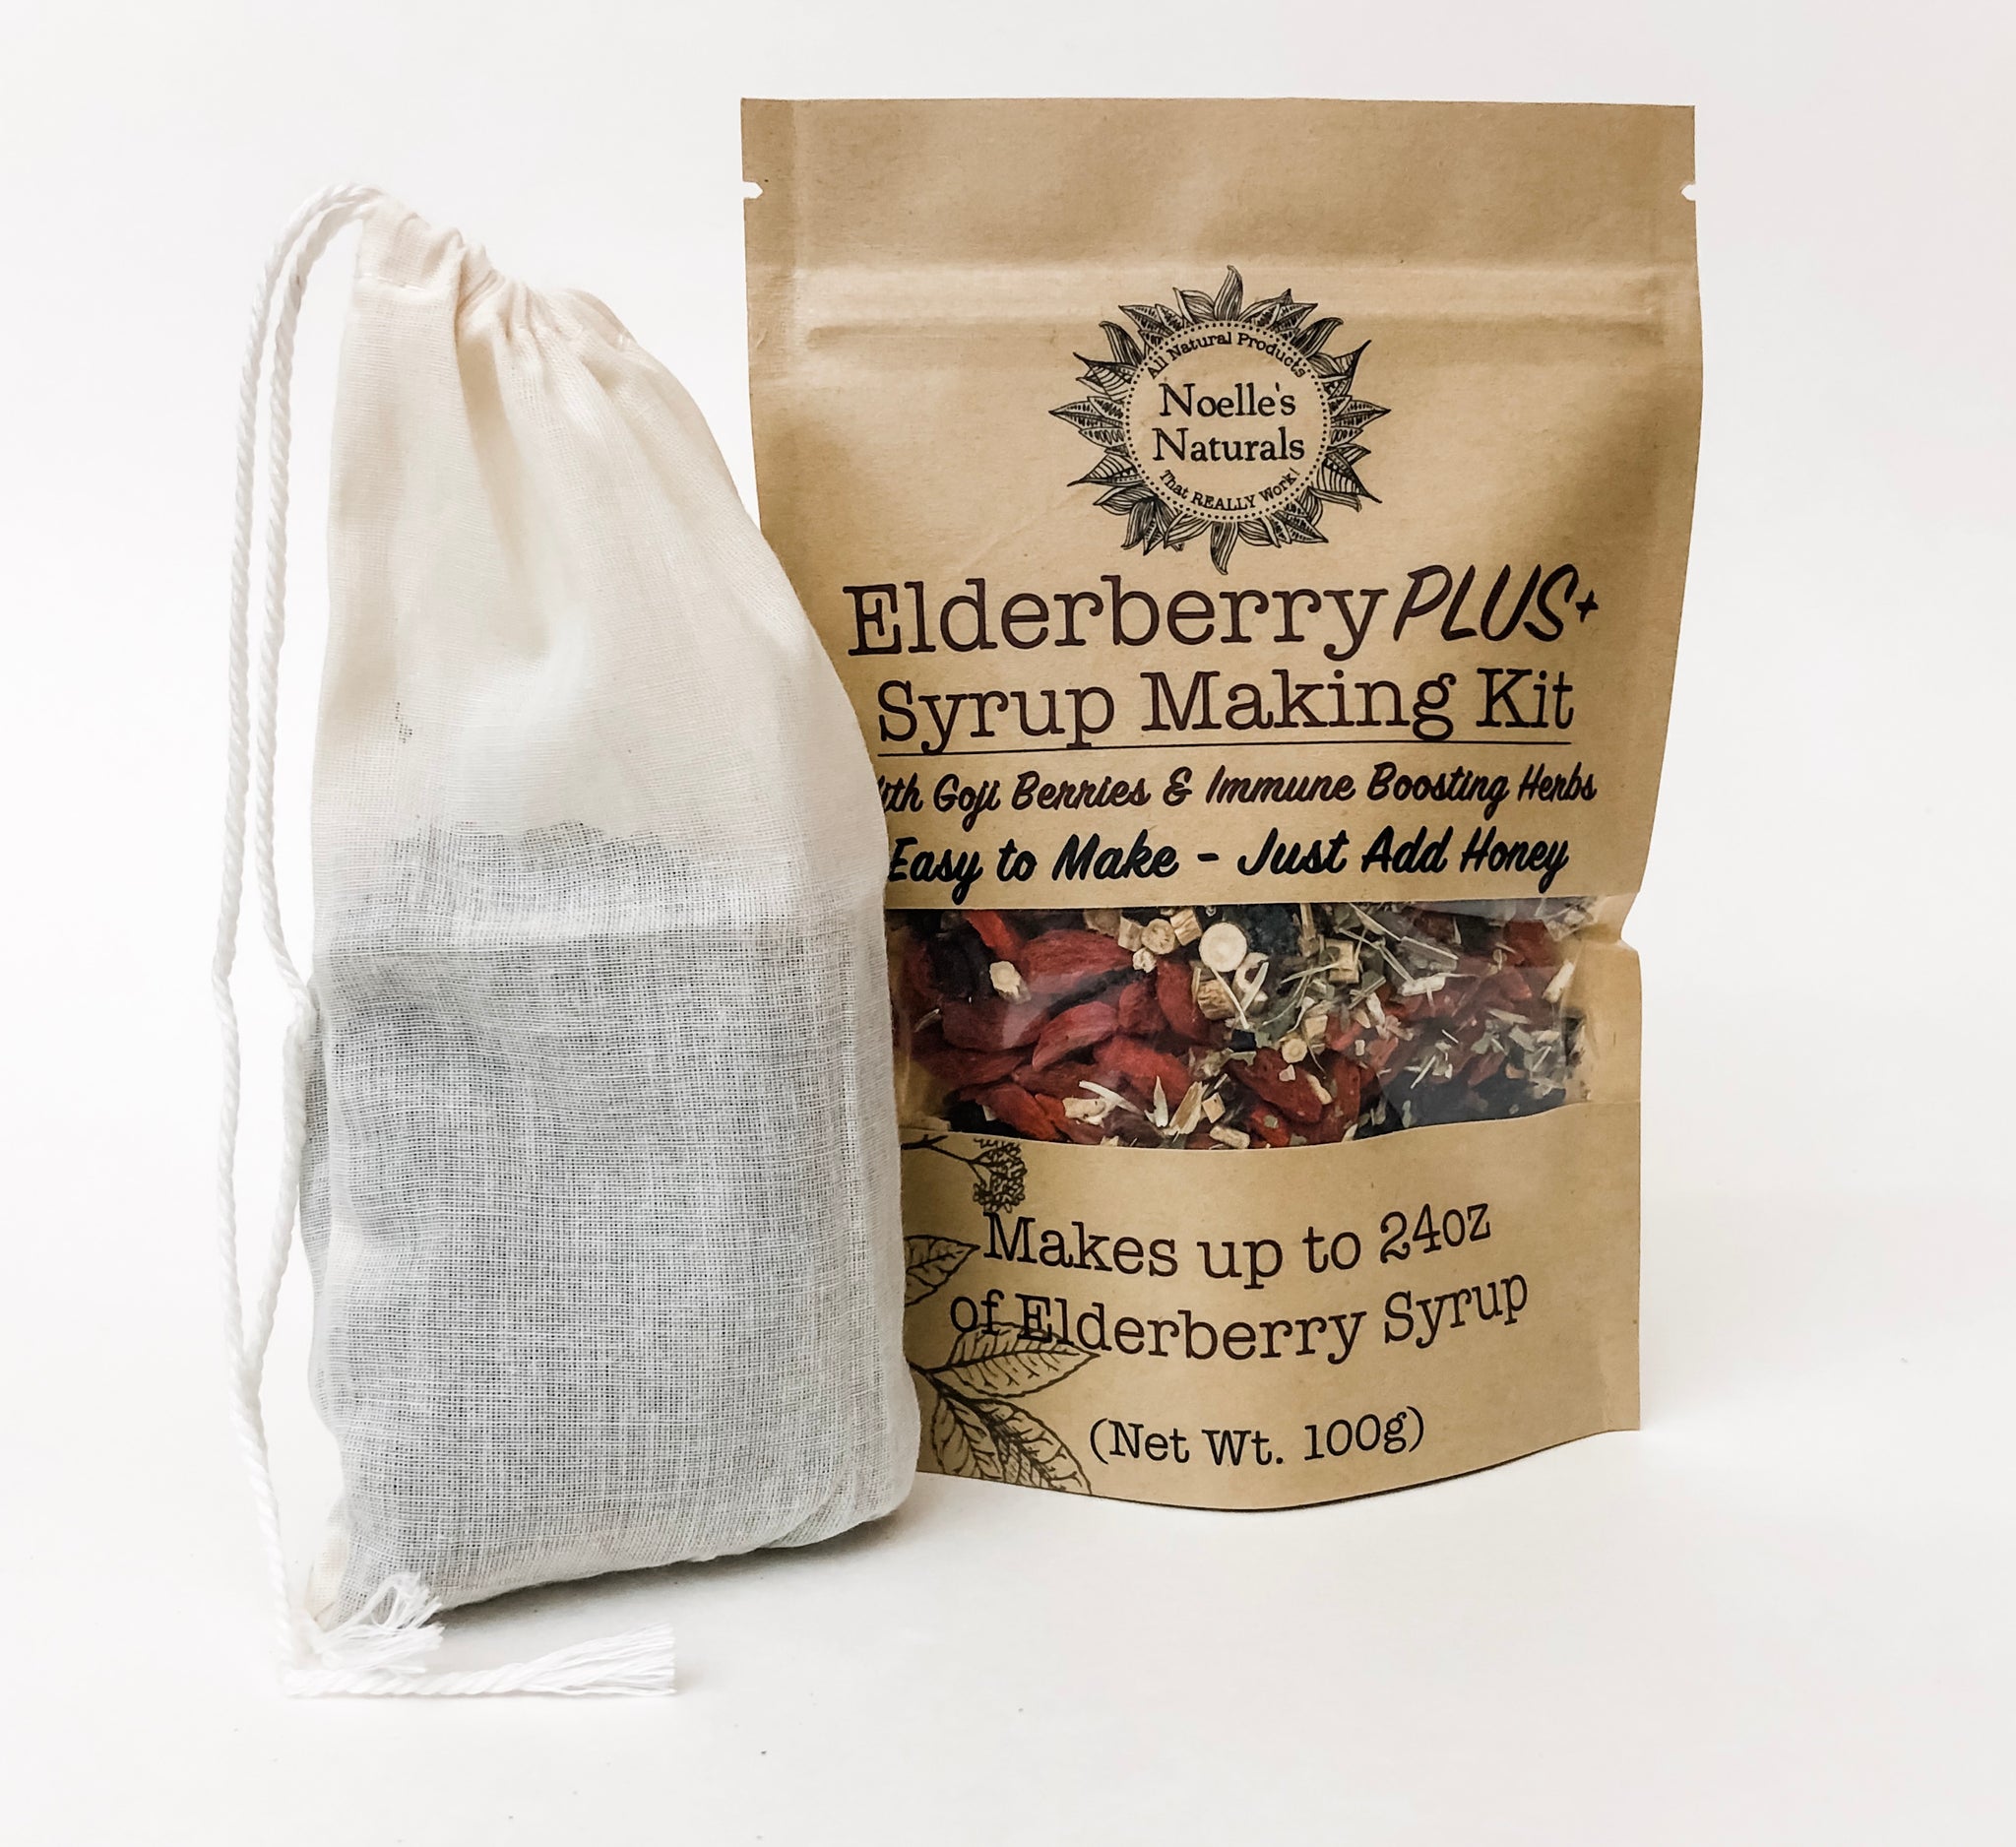 Elderberry Plus+ Syrup DIY Kit - all the dry ingredients with added benefits of goji berry, reships, echinacea and more!